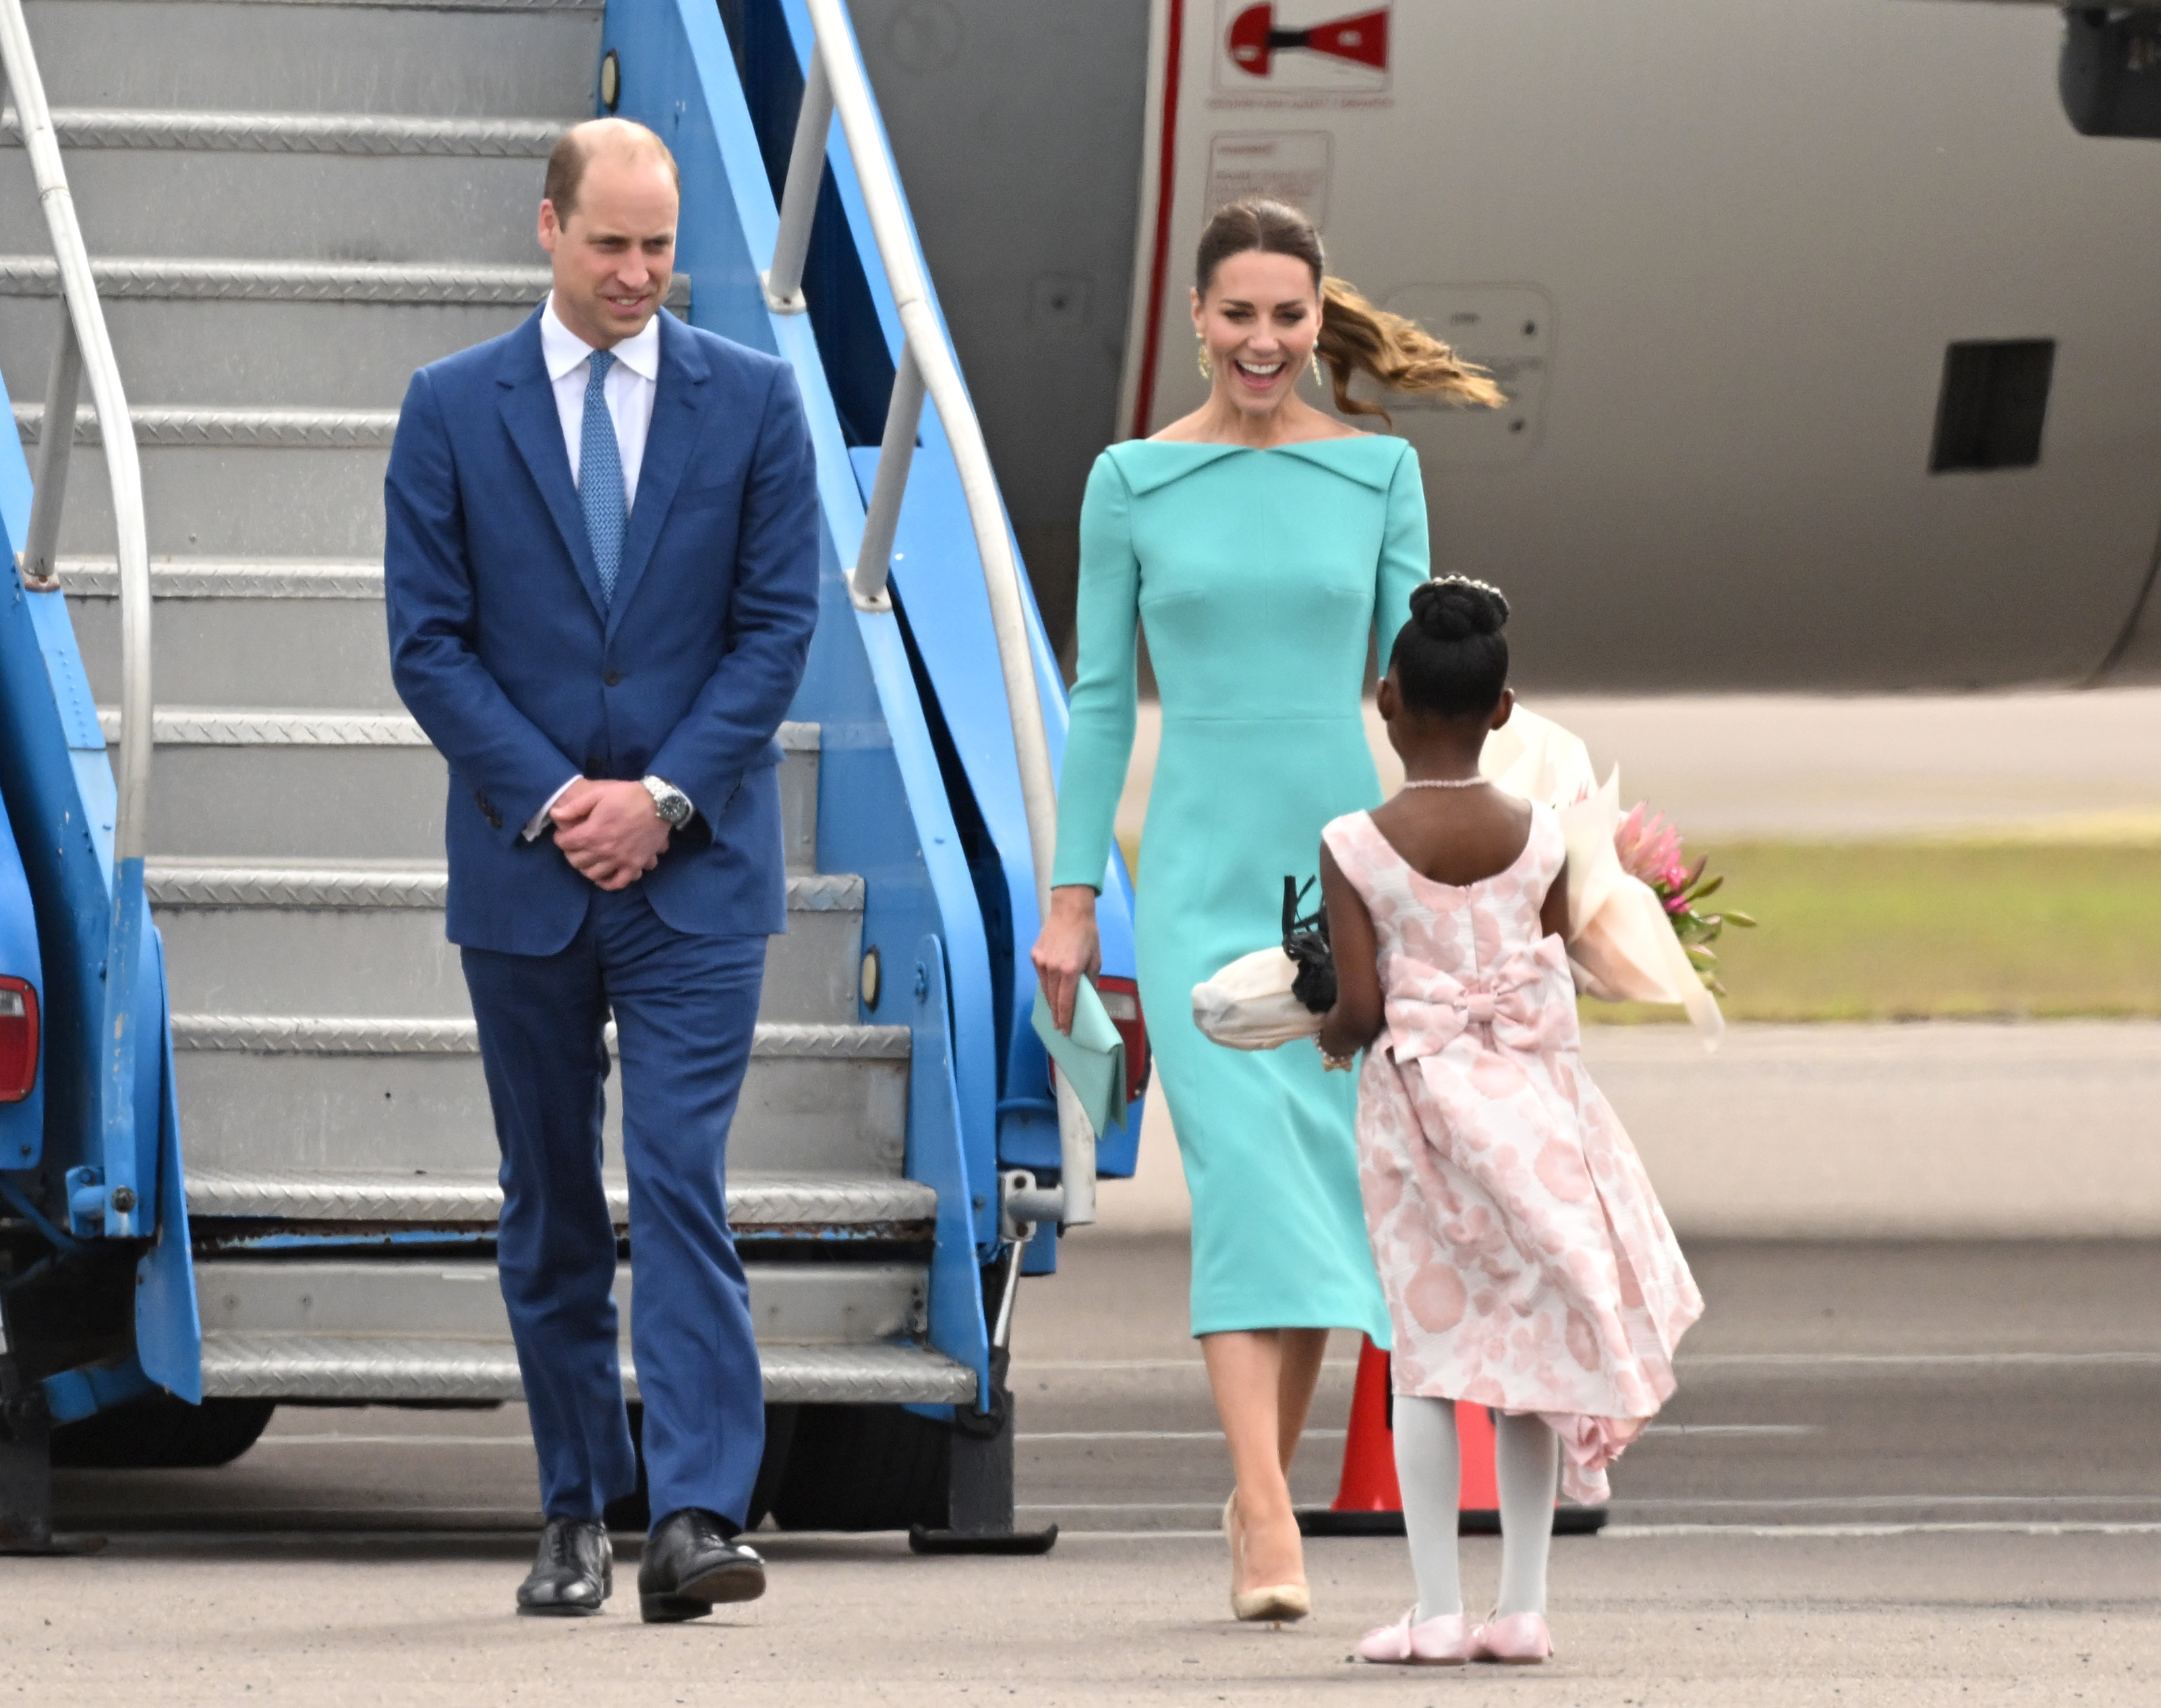 Prince William and Kate Middleton are greeted in the Bahamas at at Lynden Pindling International Airport by Aniah Moss, who gave the duchess flowers